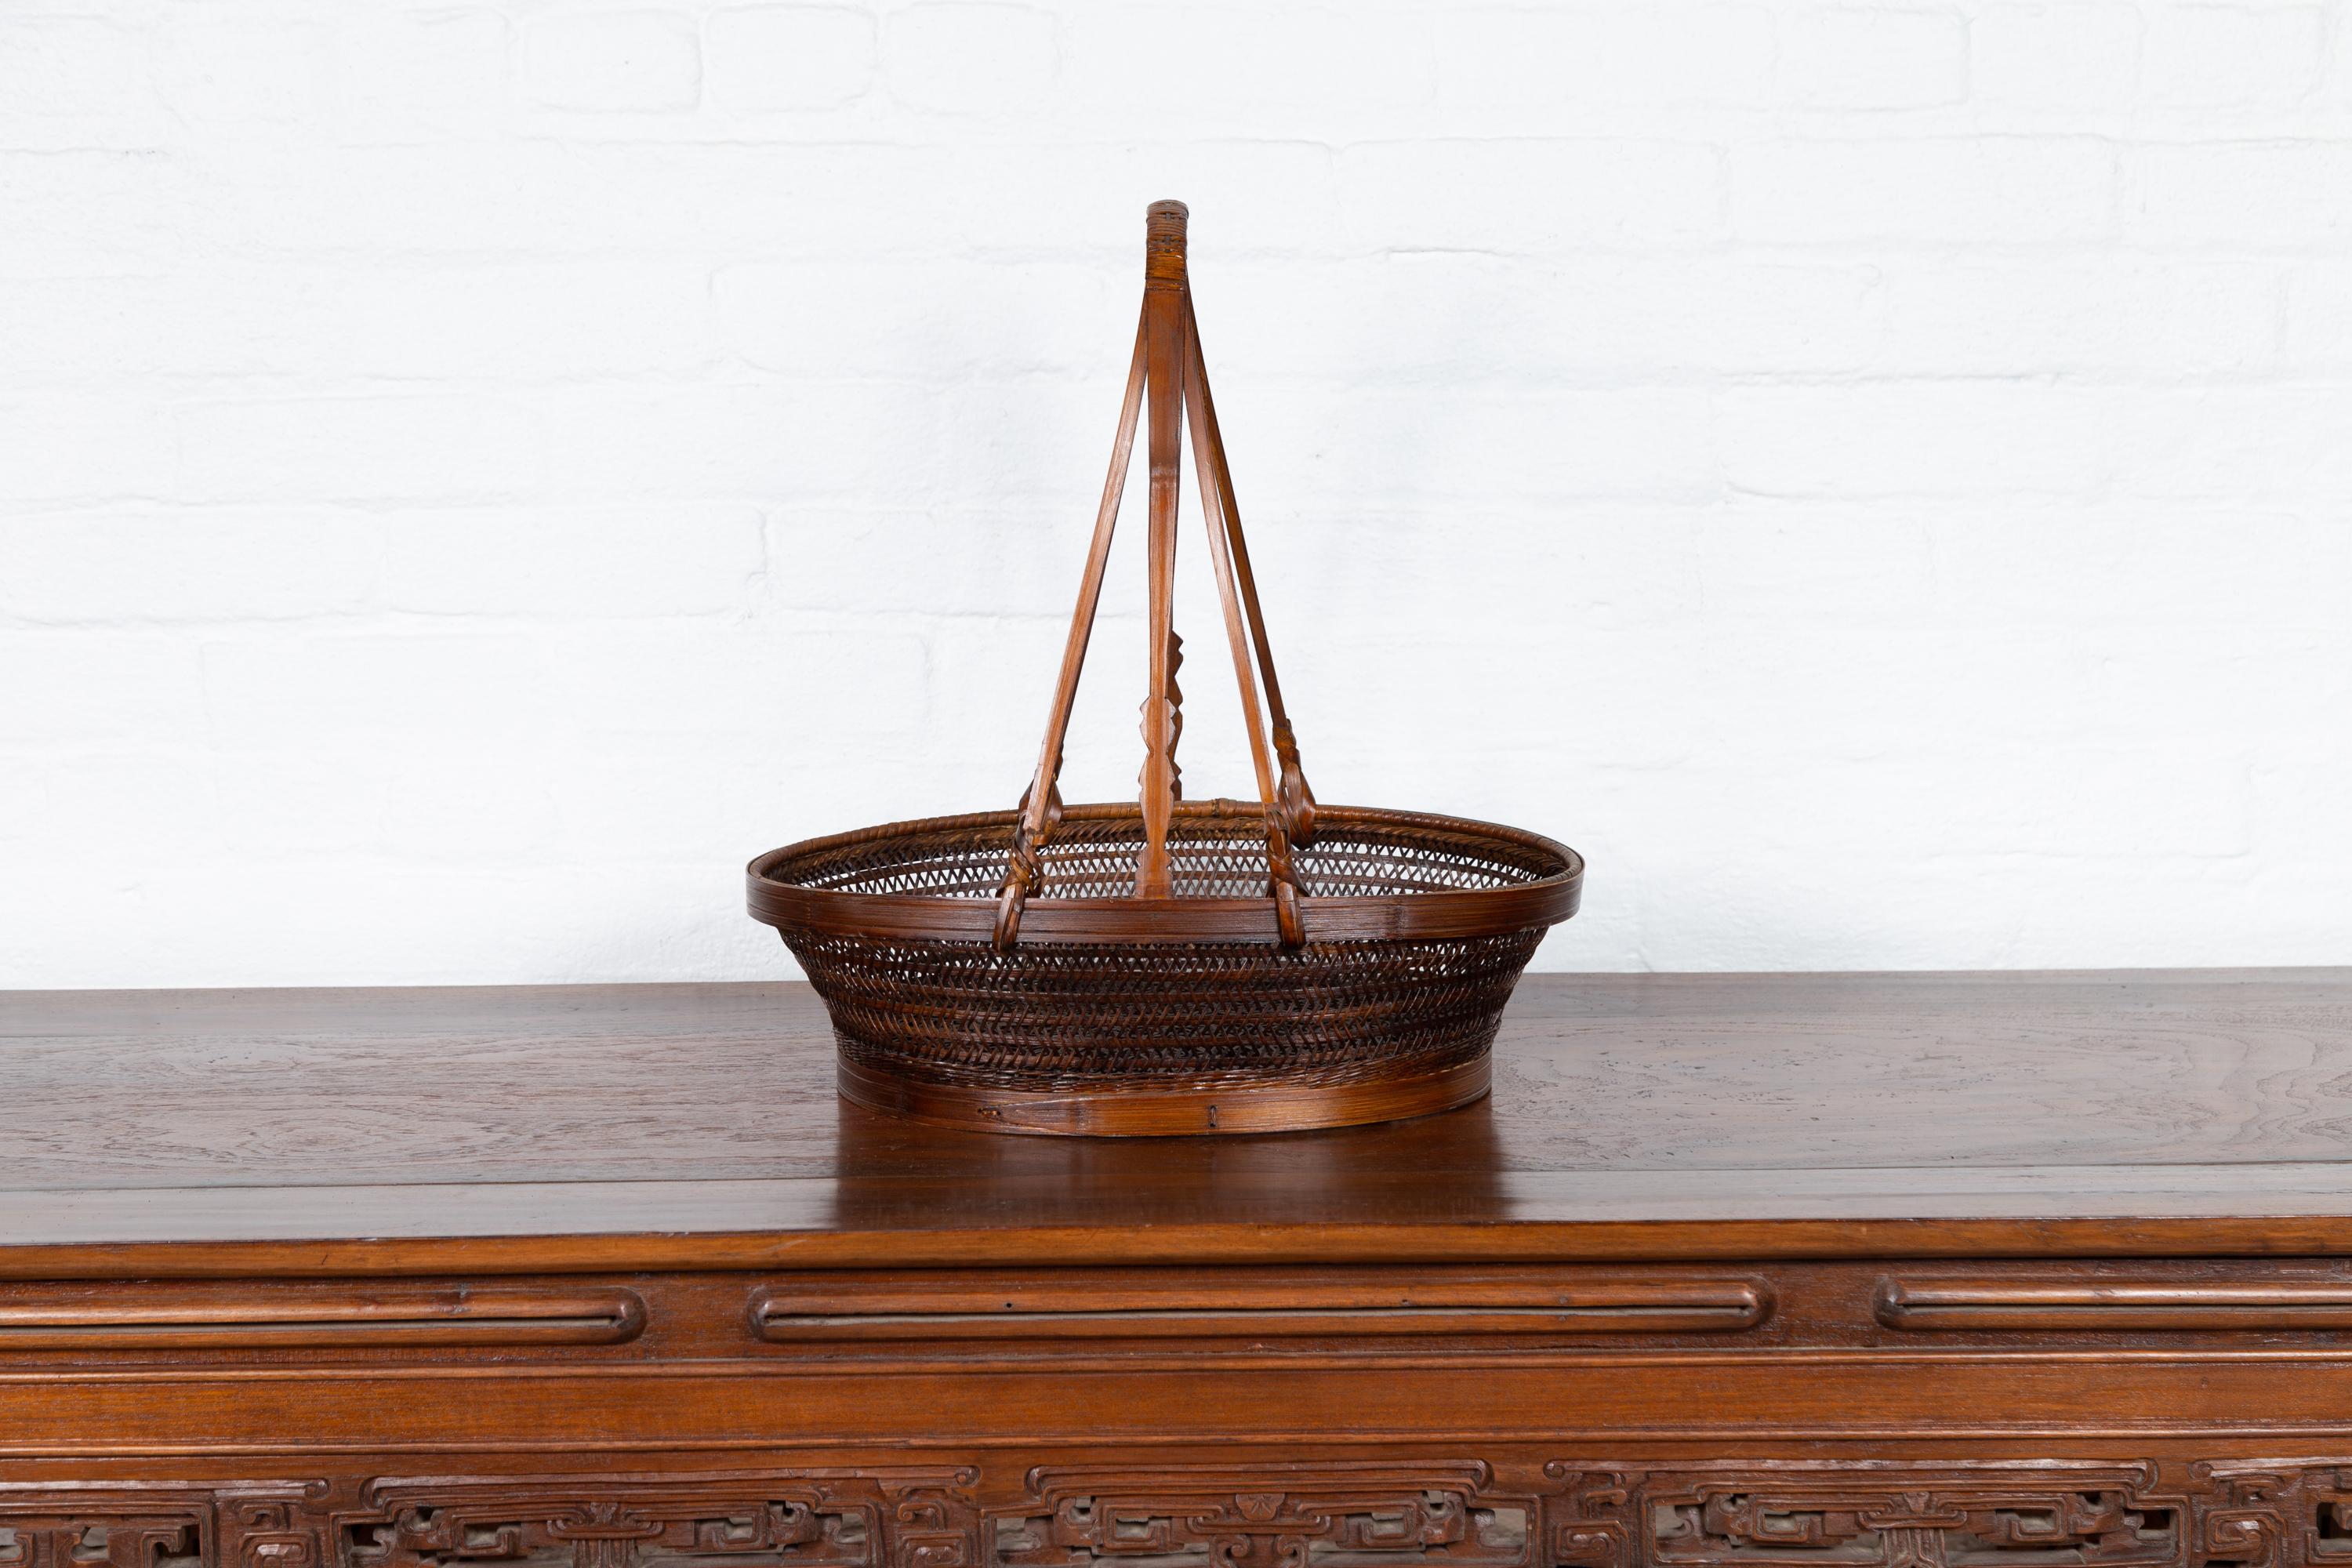 A vintage woven rattan carrying basket from the mid-20th century, with large handle. This mid-century vintage carrying basket, skillfully crafted from woven rattan and enhanced with a sturdy wooden frame, exudes a charming, rustic elegance.